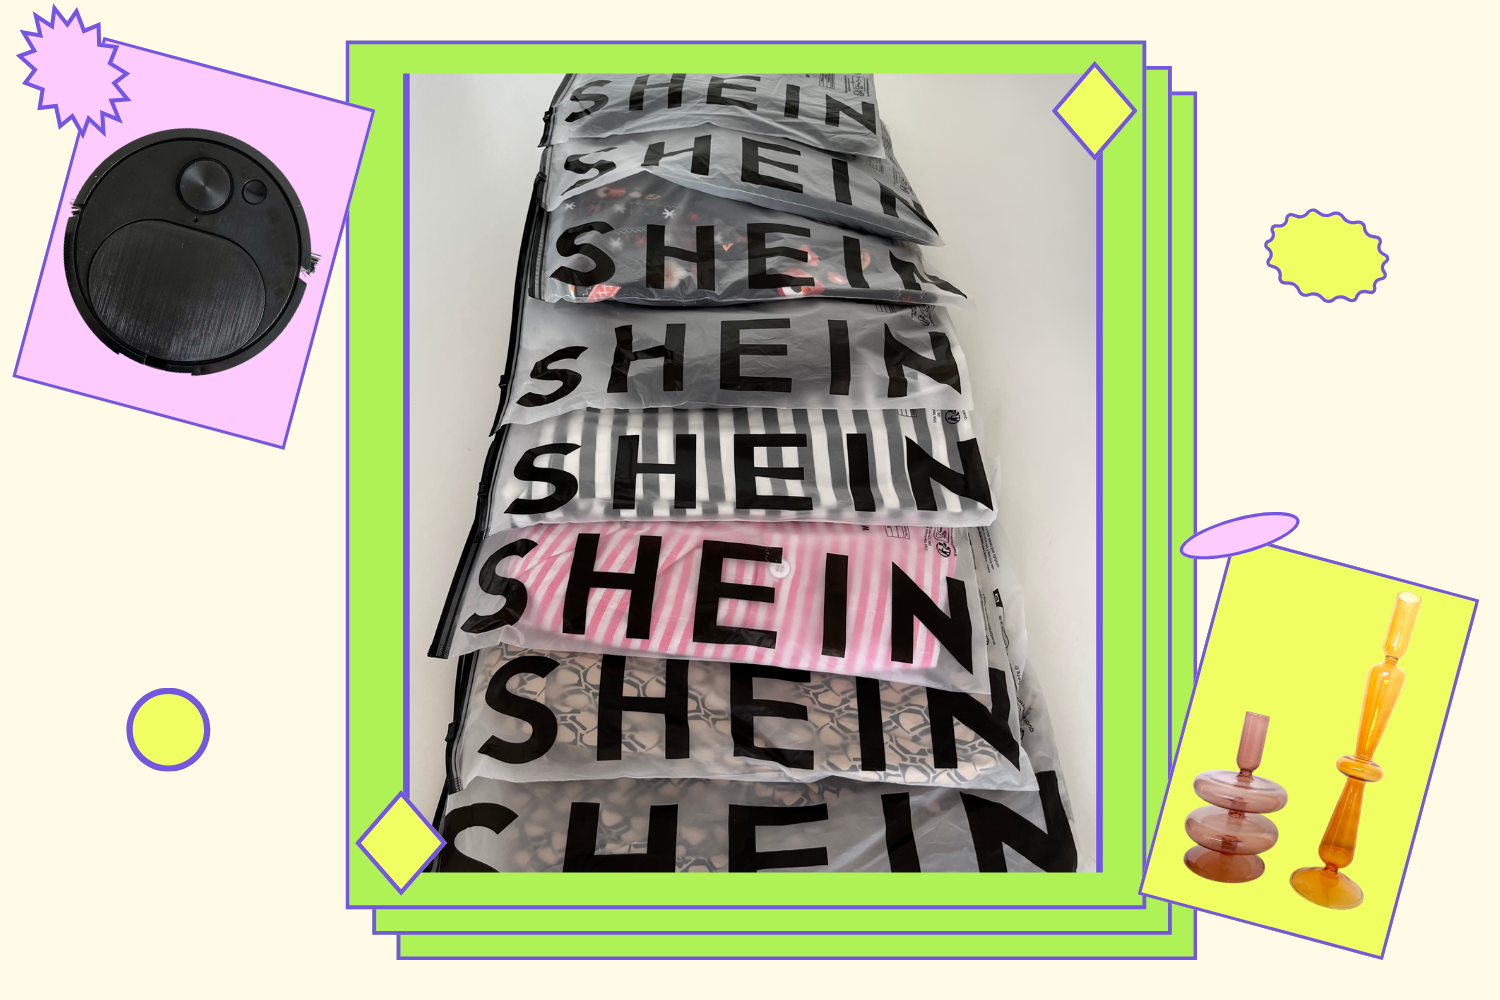 SHEIN Returns Are Free But Not Easy. Here’s How We Got Our Money Back and a Freebie Too.